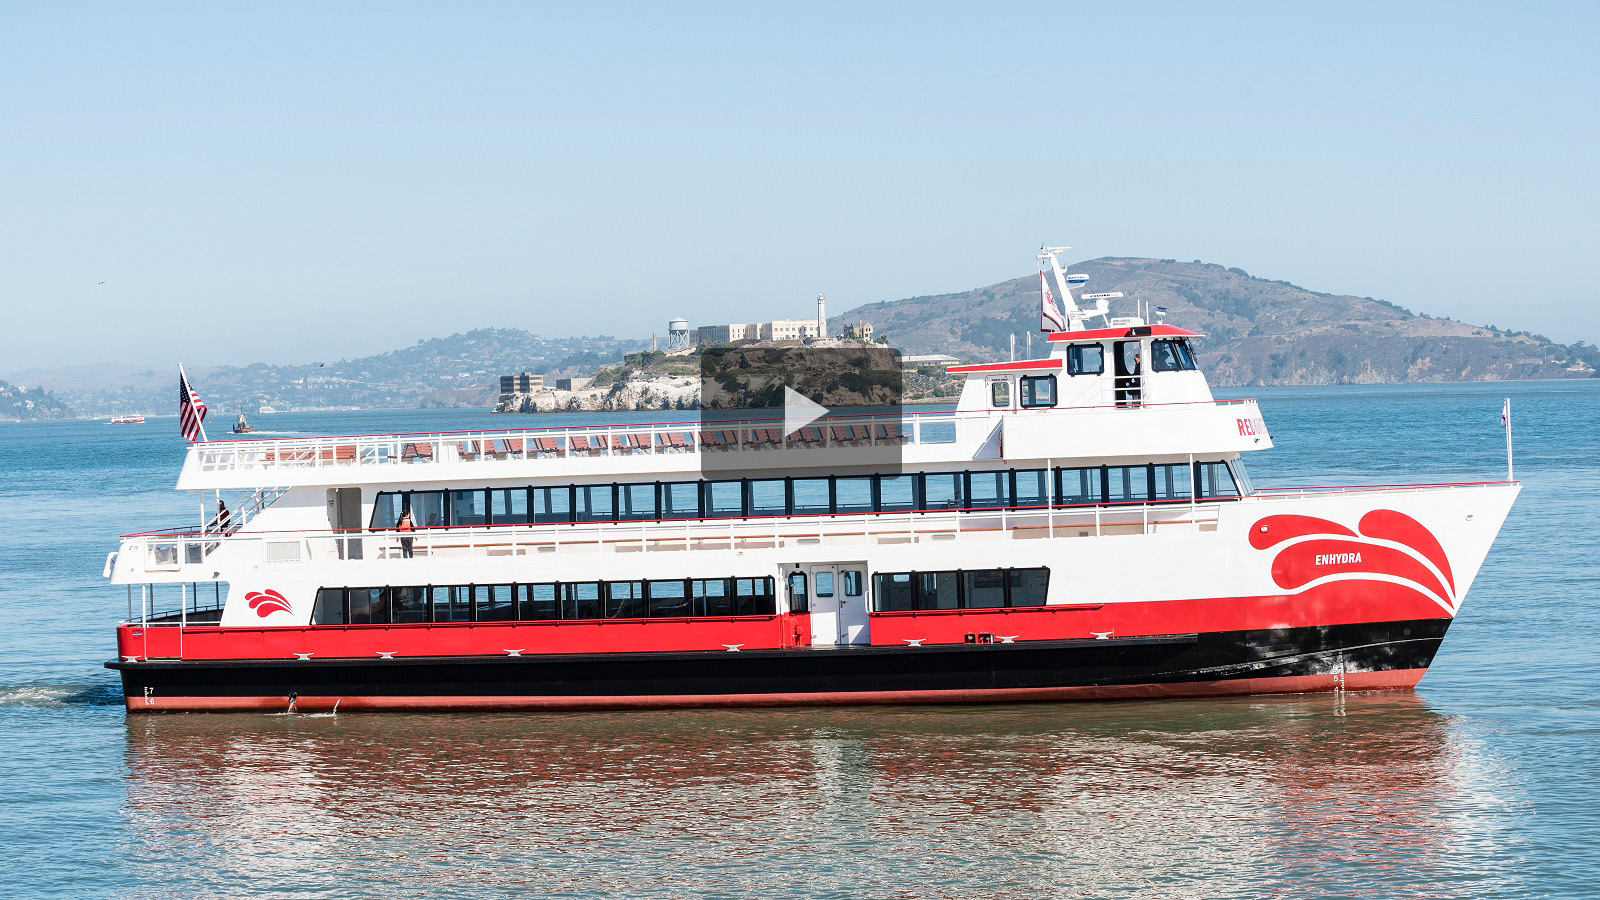 Red and White Fleet is reducing their carbon footprint by using hybrid marine and electric marine solutions from BAE Systems on their San Francisco Bay sightseeing tours.